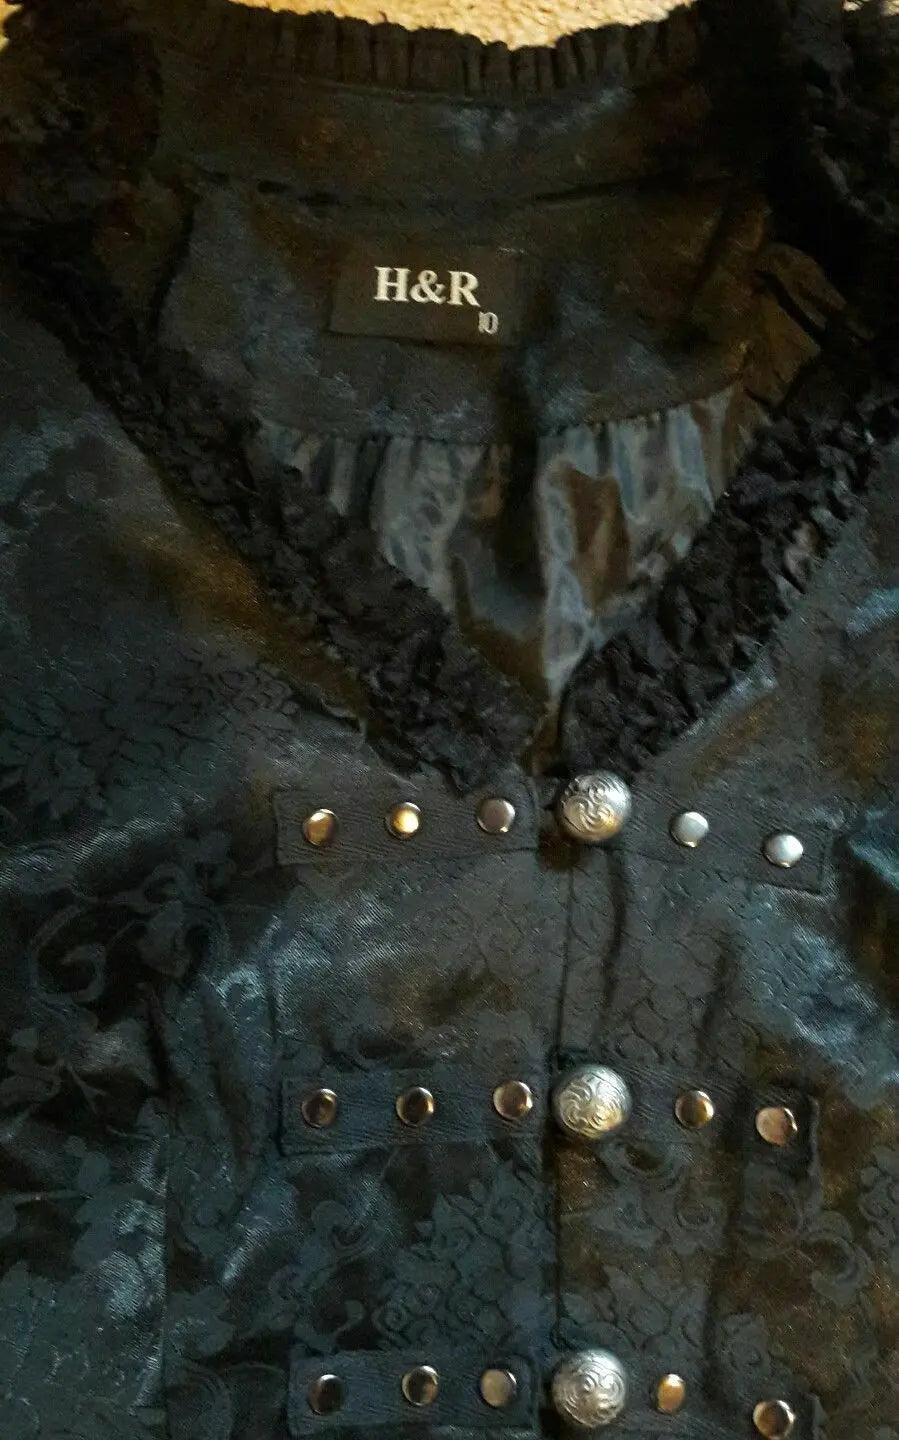 GORGEOUS H&R black satin brocade jacket with tails. Goth emo alternative size 10 H&R